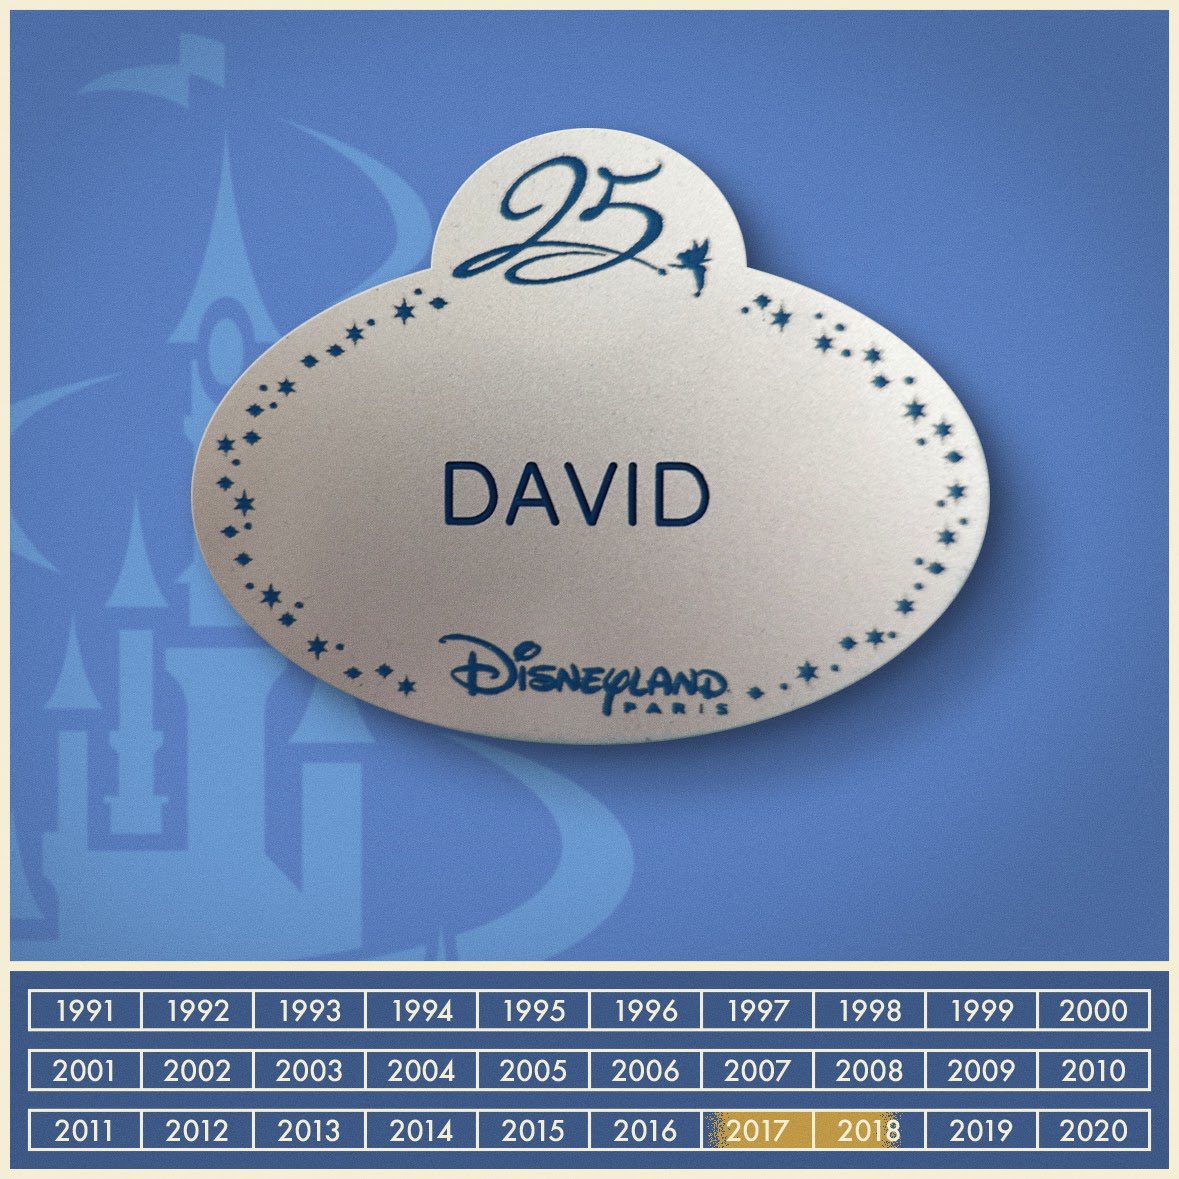 The 25th anniversary was another major event for the resort, with much of the work initiated during the previous years paying off. For the first time nametags got a shiny silver treatment which worked perfectly with the celebration’s silver and blue color palette.